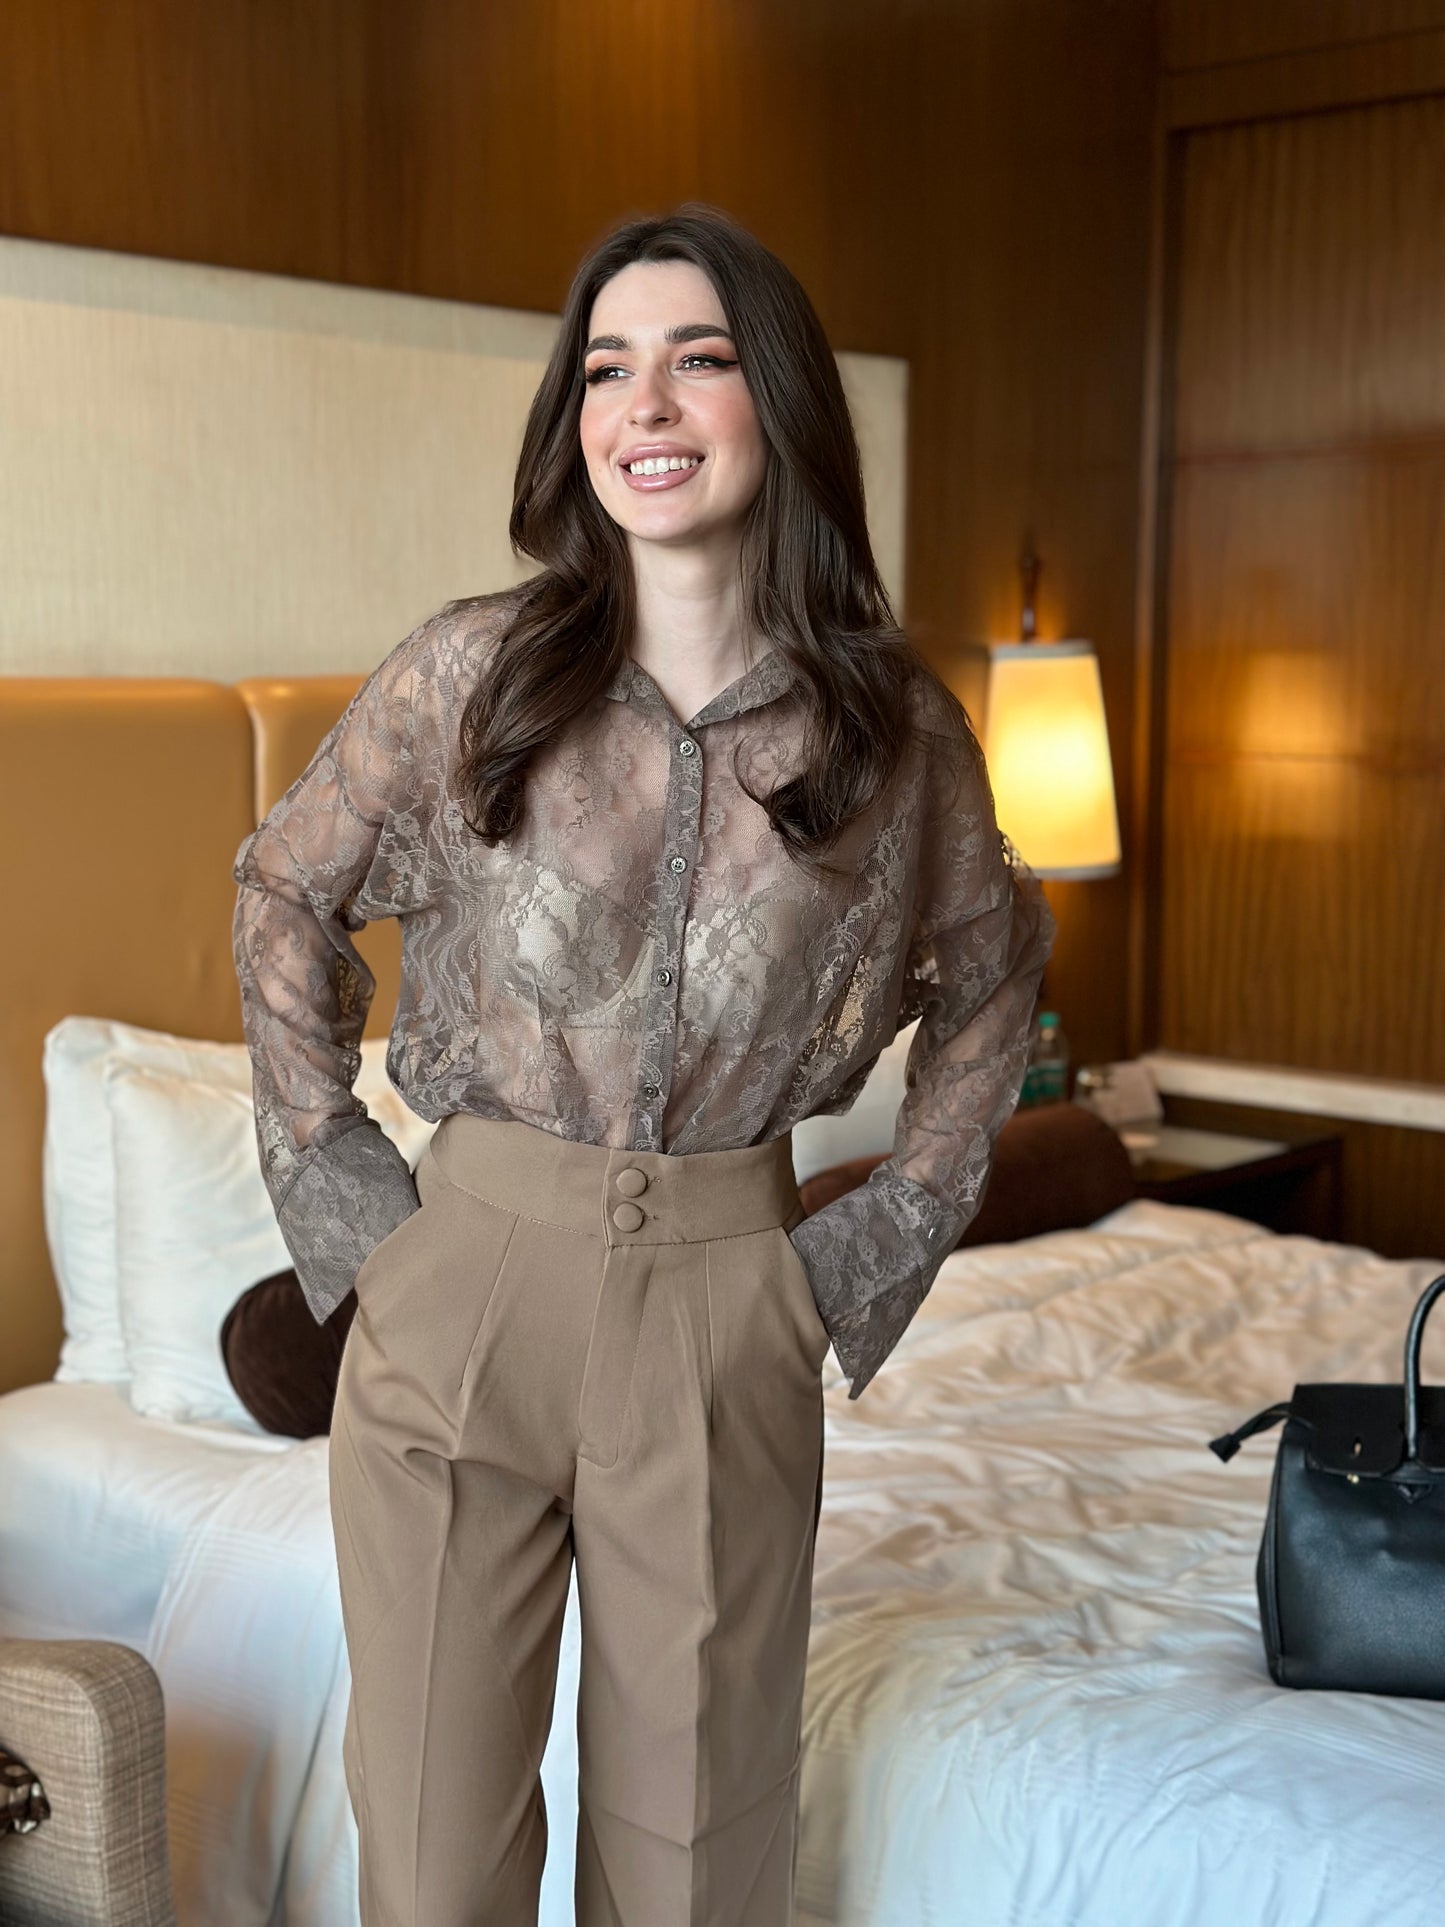 Lace See Through Shirt With Beige Pants